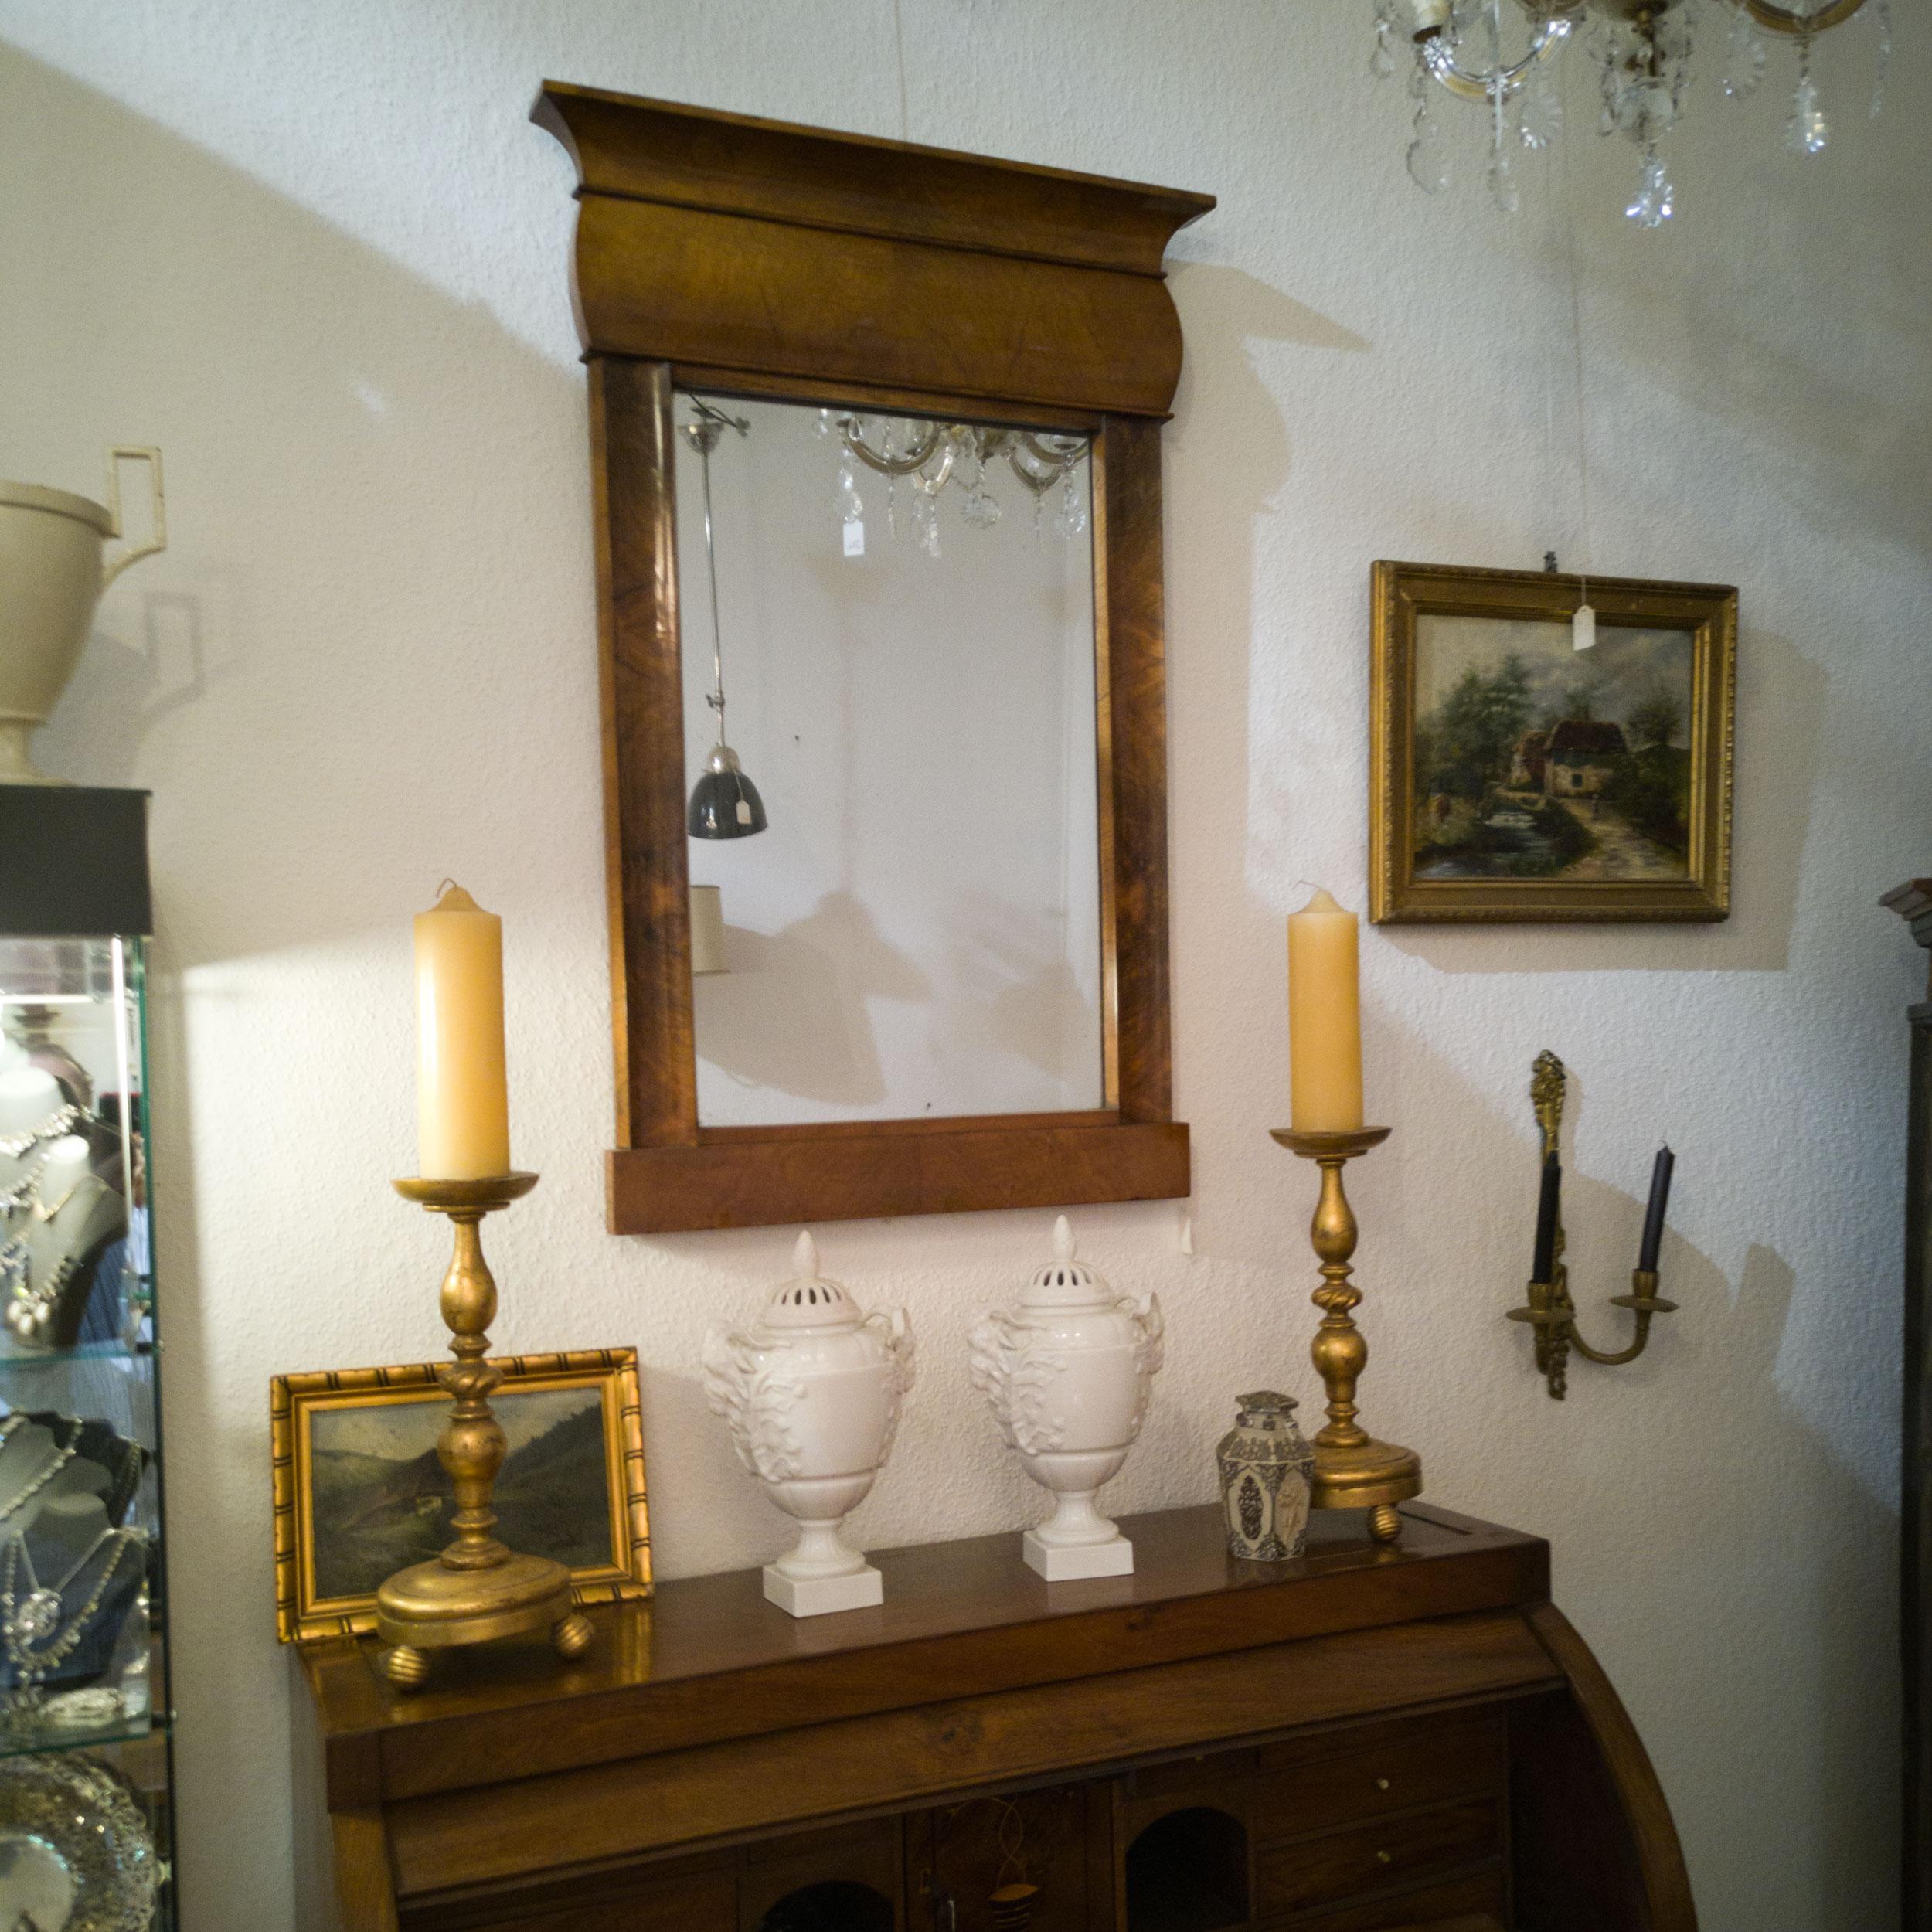 Fireplace mirror Biedermeier circa 1840 nut shellac

Puristically held mirror with a frame made of walnut burl wood veneer. The from does without obtrusive elements such as carvings or columns, a clear language of form was the spirit of the time.